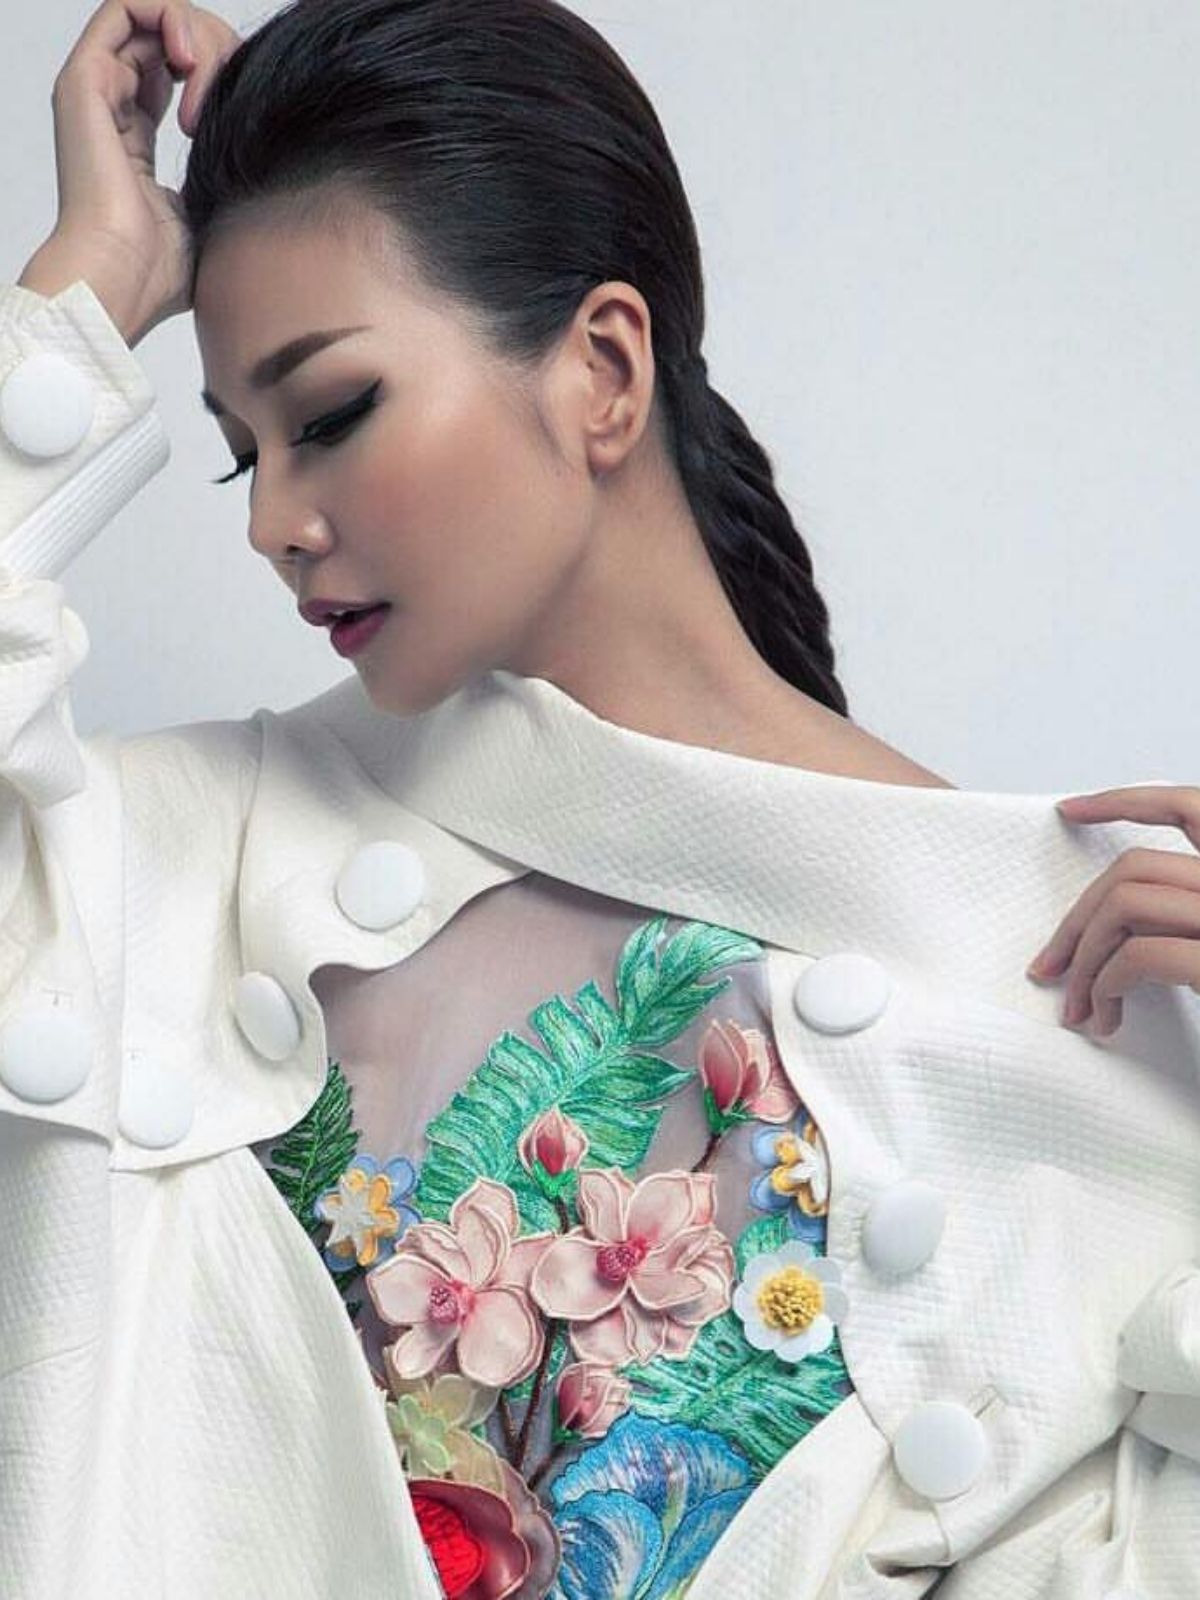 nguyen vietnamese couture - model in embroided blouse - on thursd